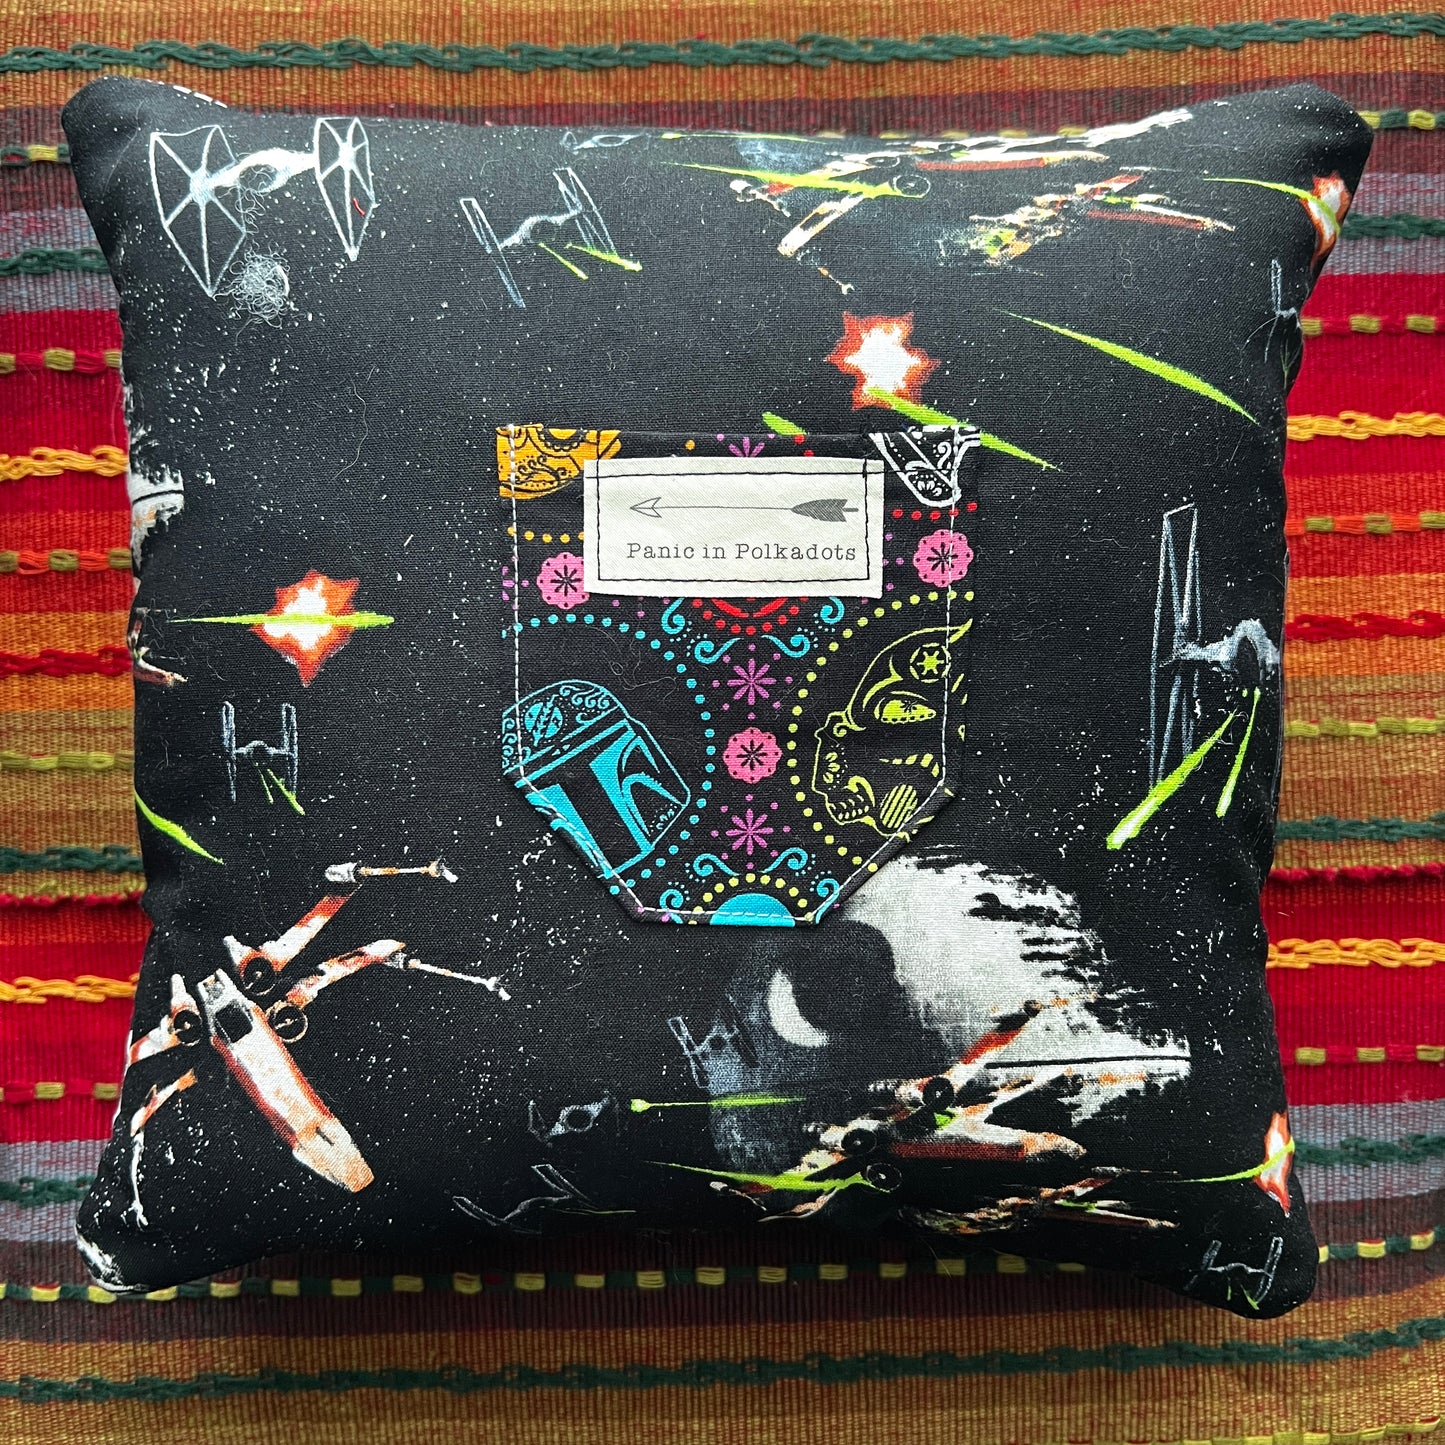 back view of retro droids cathedral square pillow, with space scenes and boba fett, storm trooper pocket